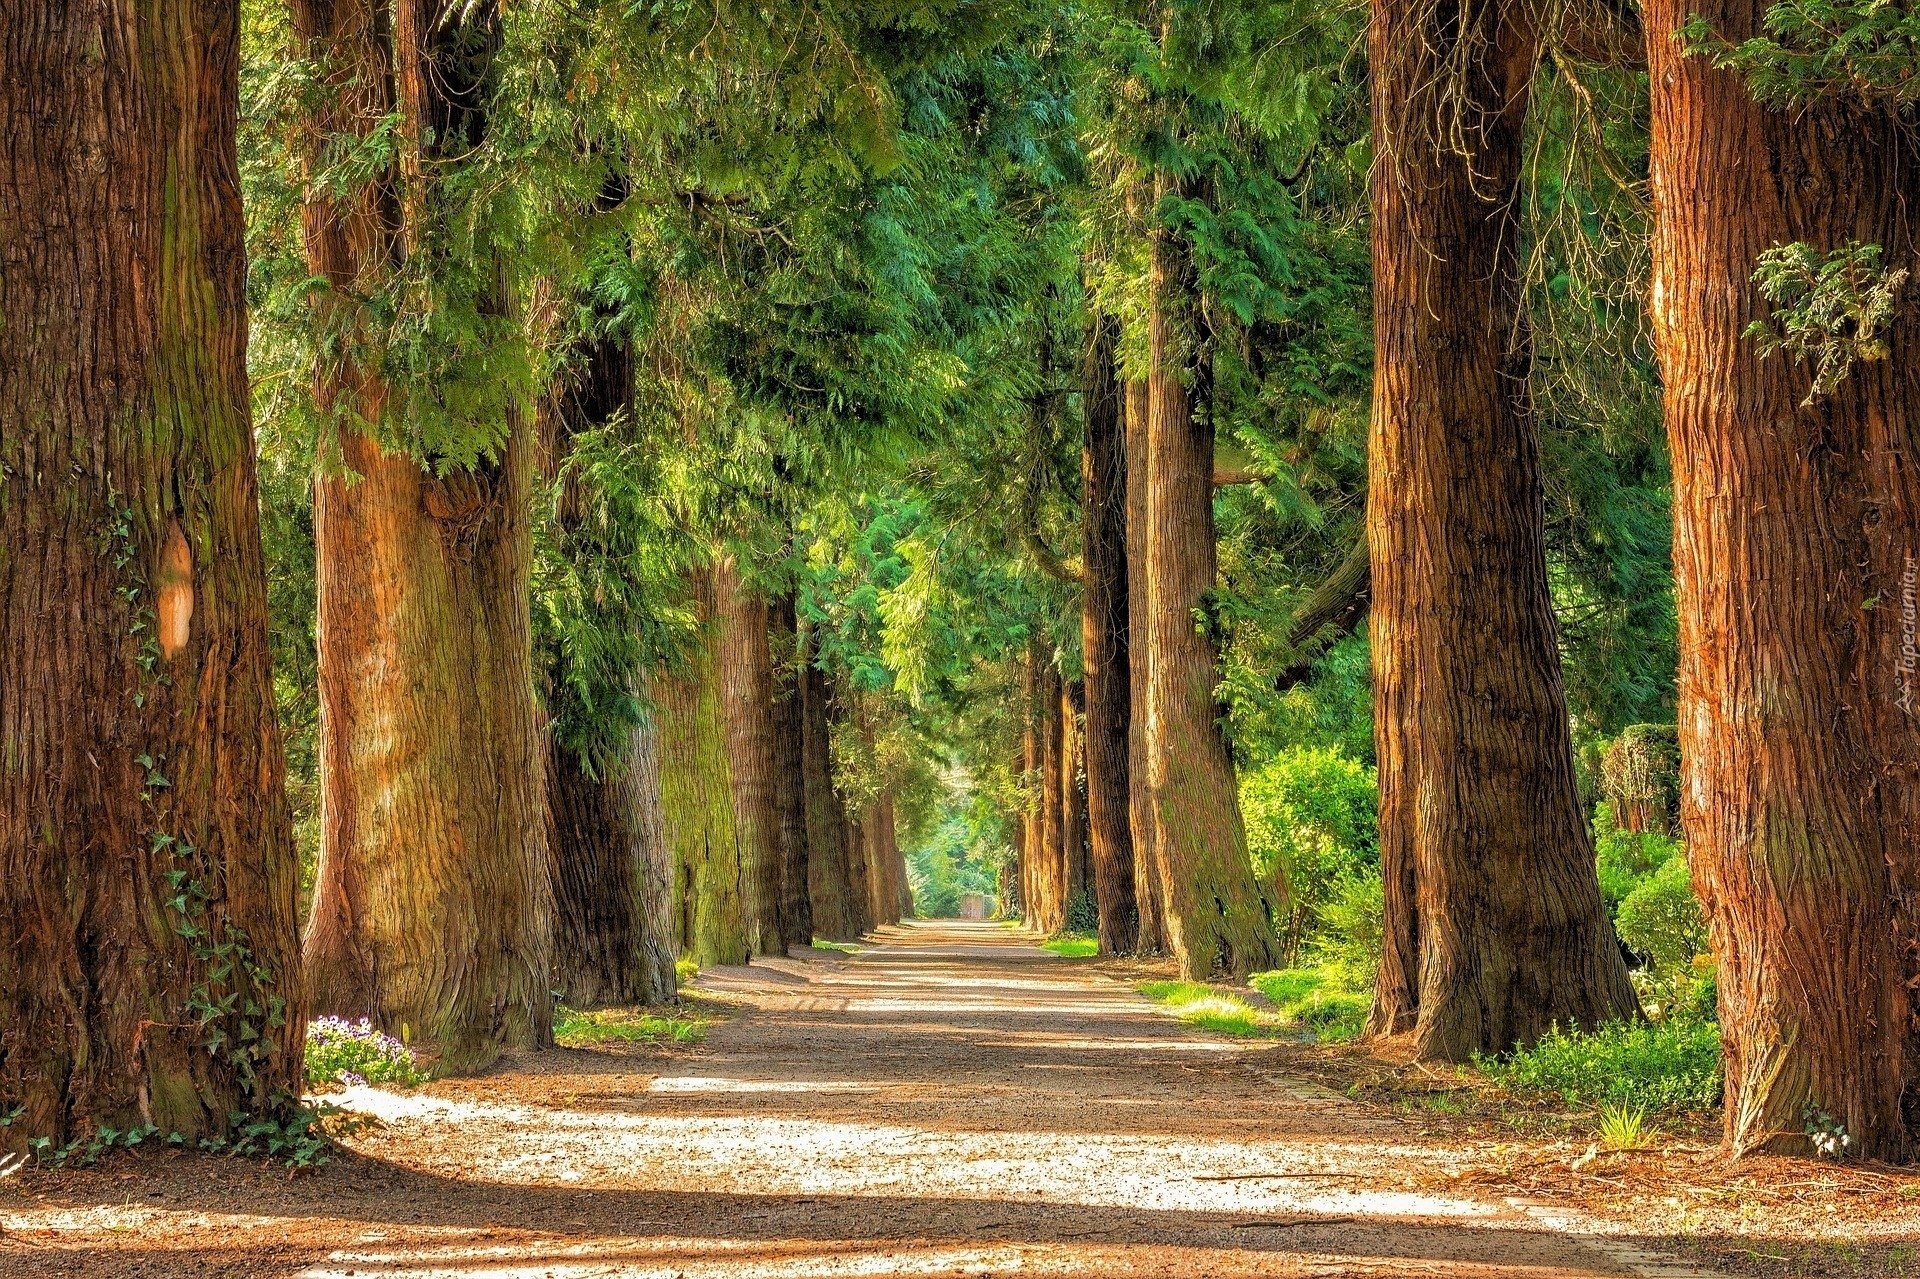 Street Lined With Sequoia Trees HD Wallpaper Background Image